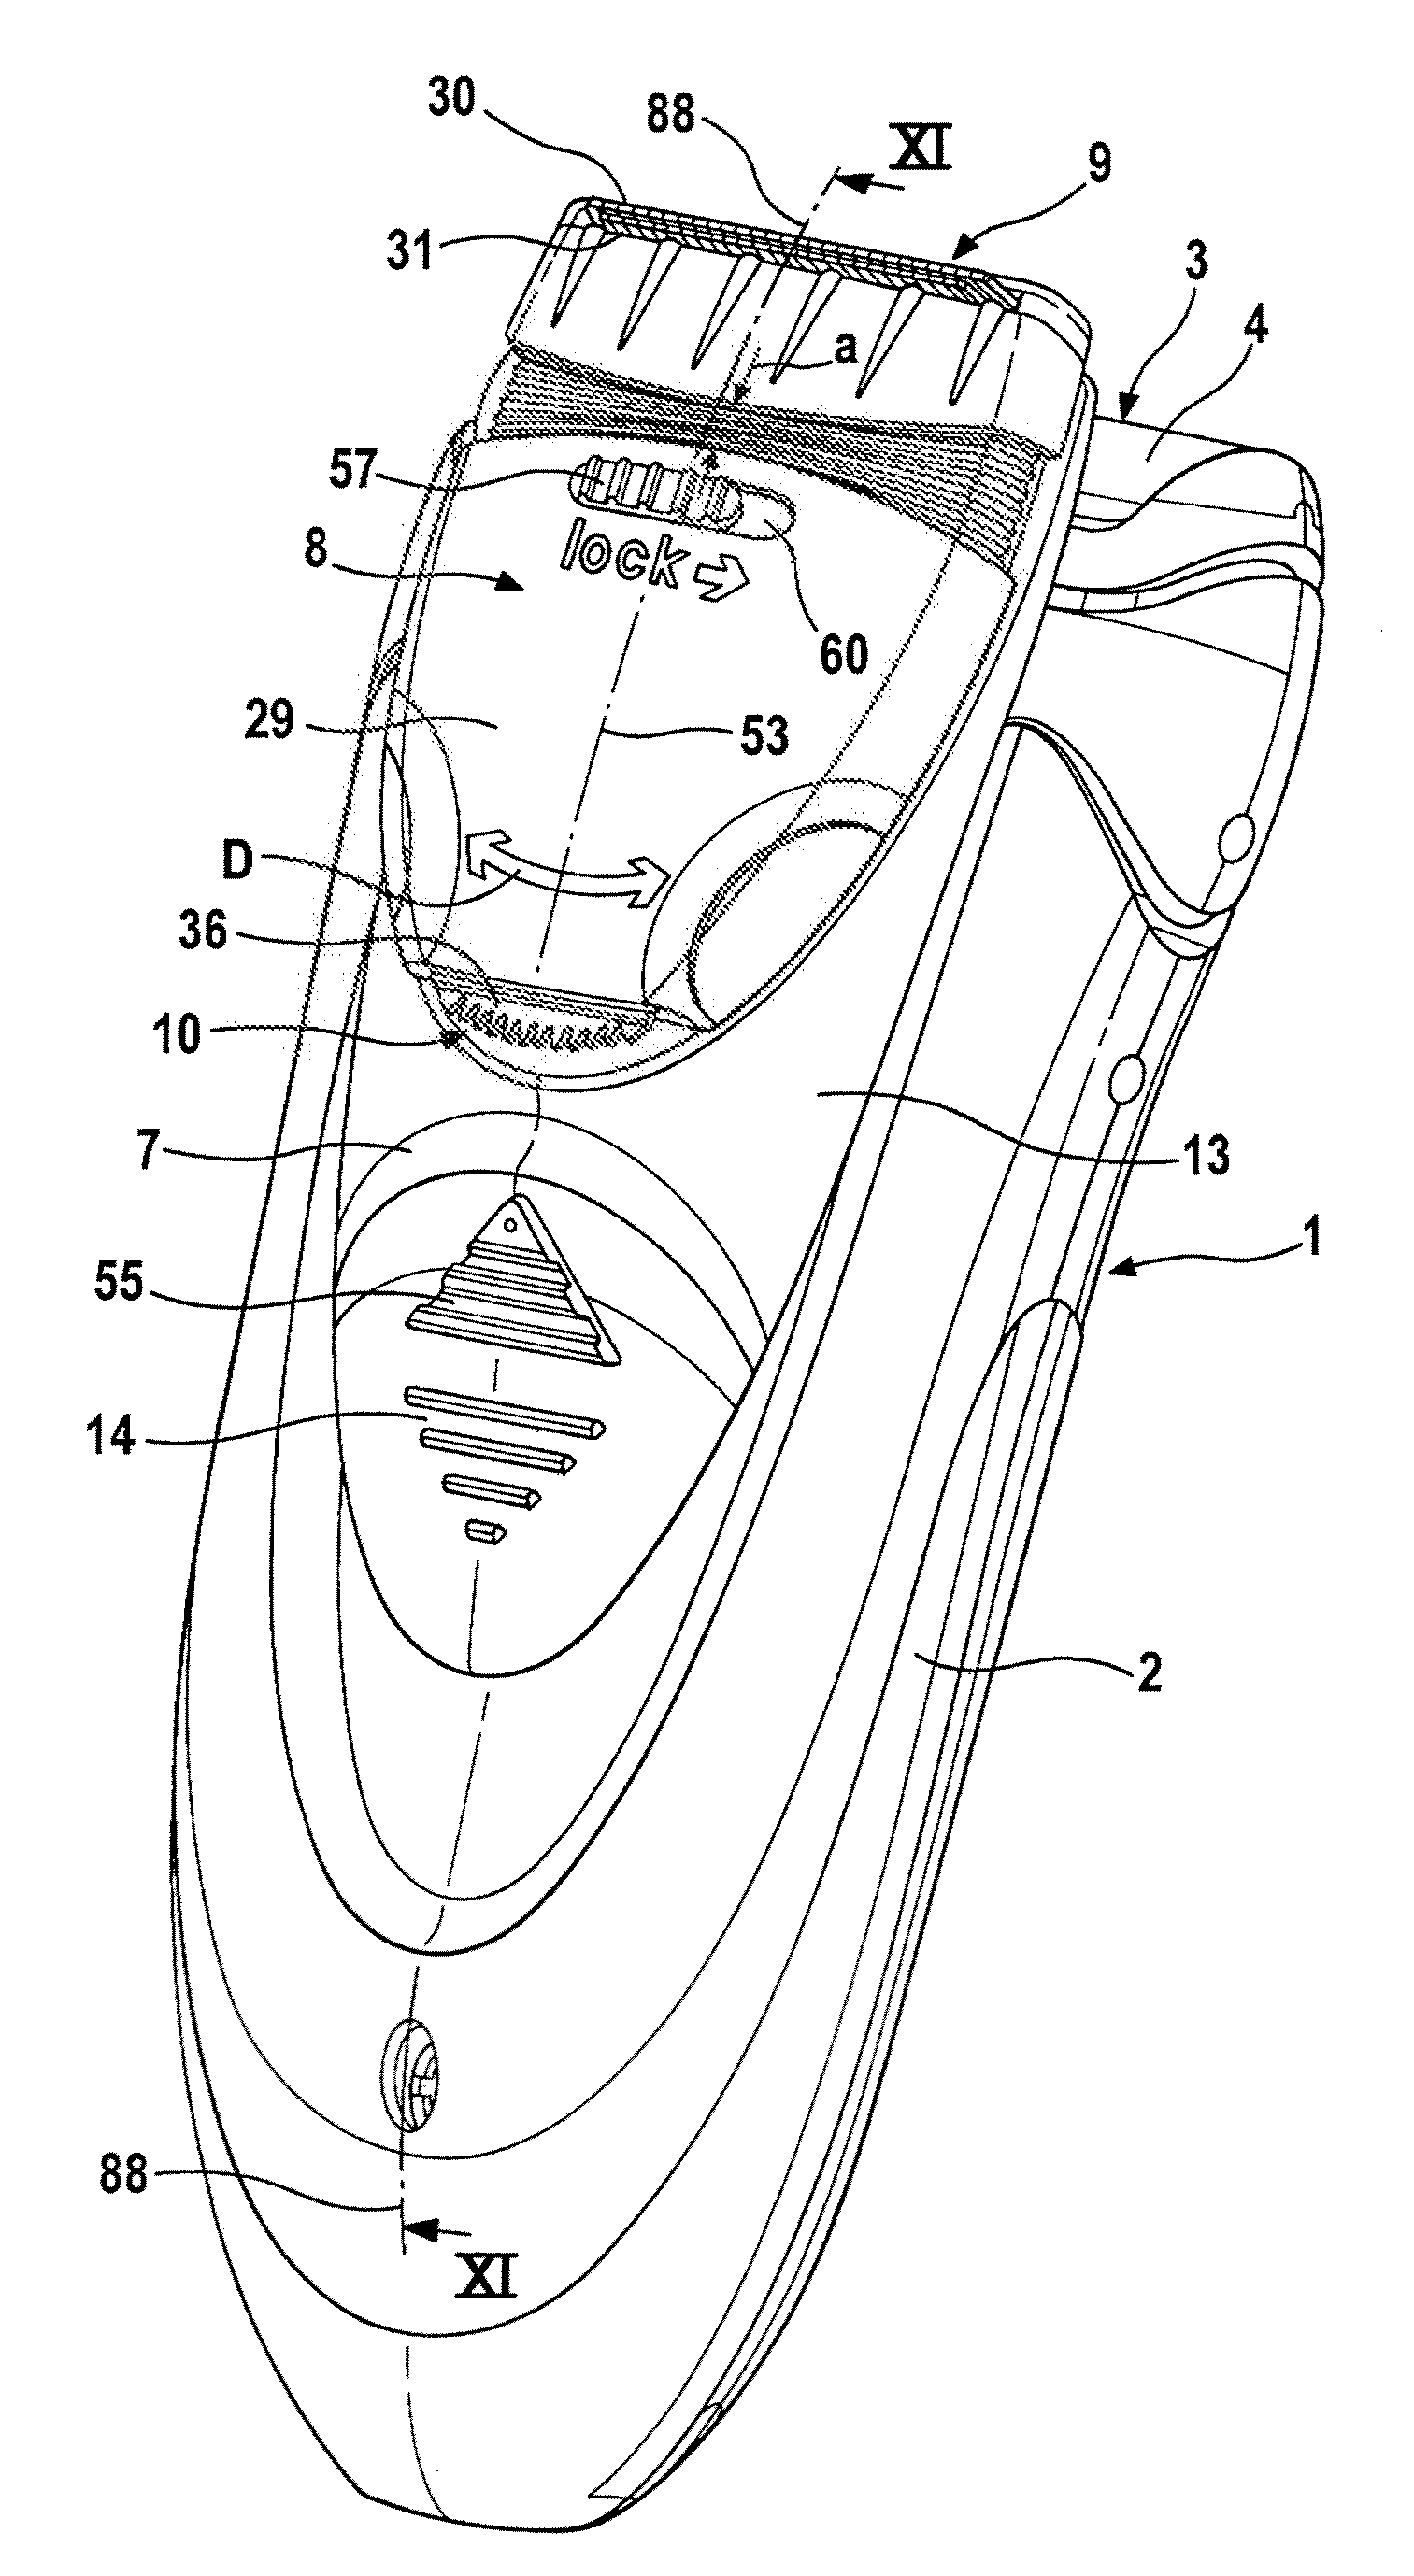 Electrically Operated Hair Cutting Device